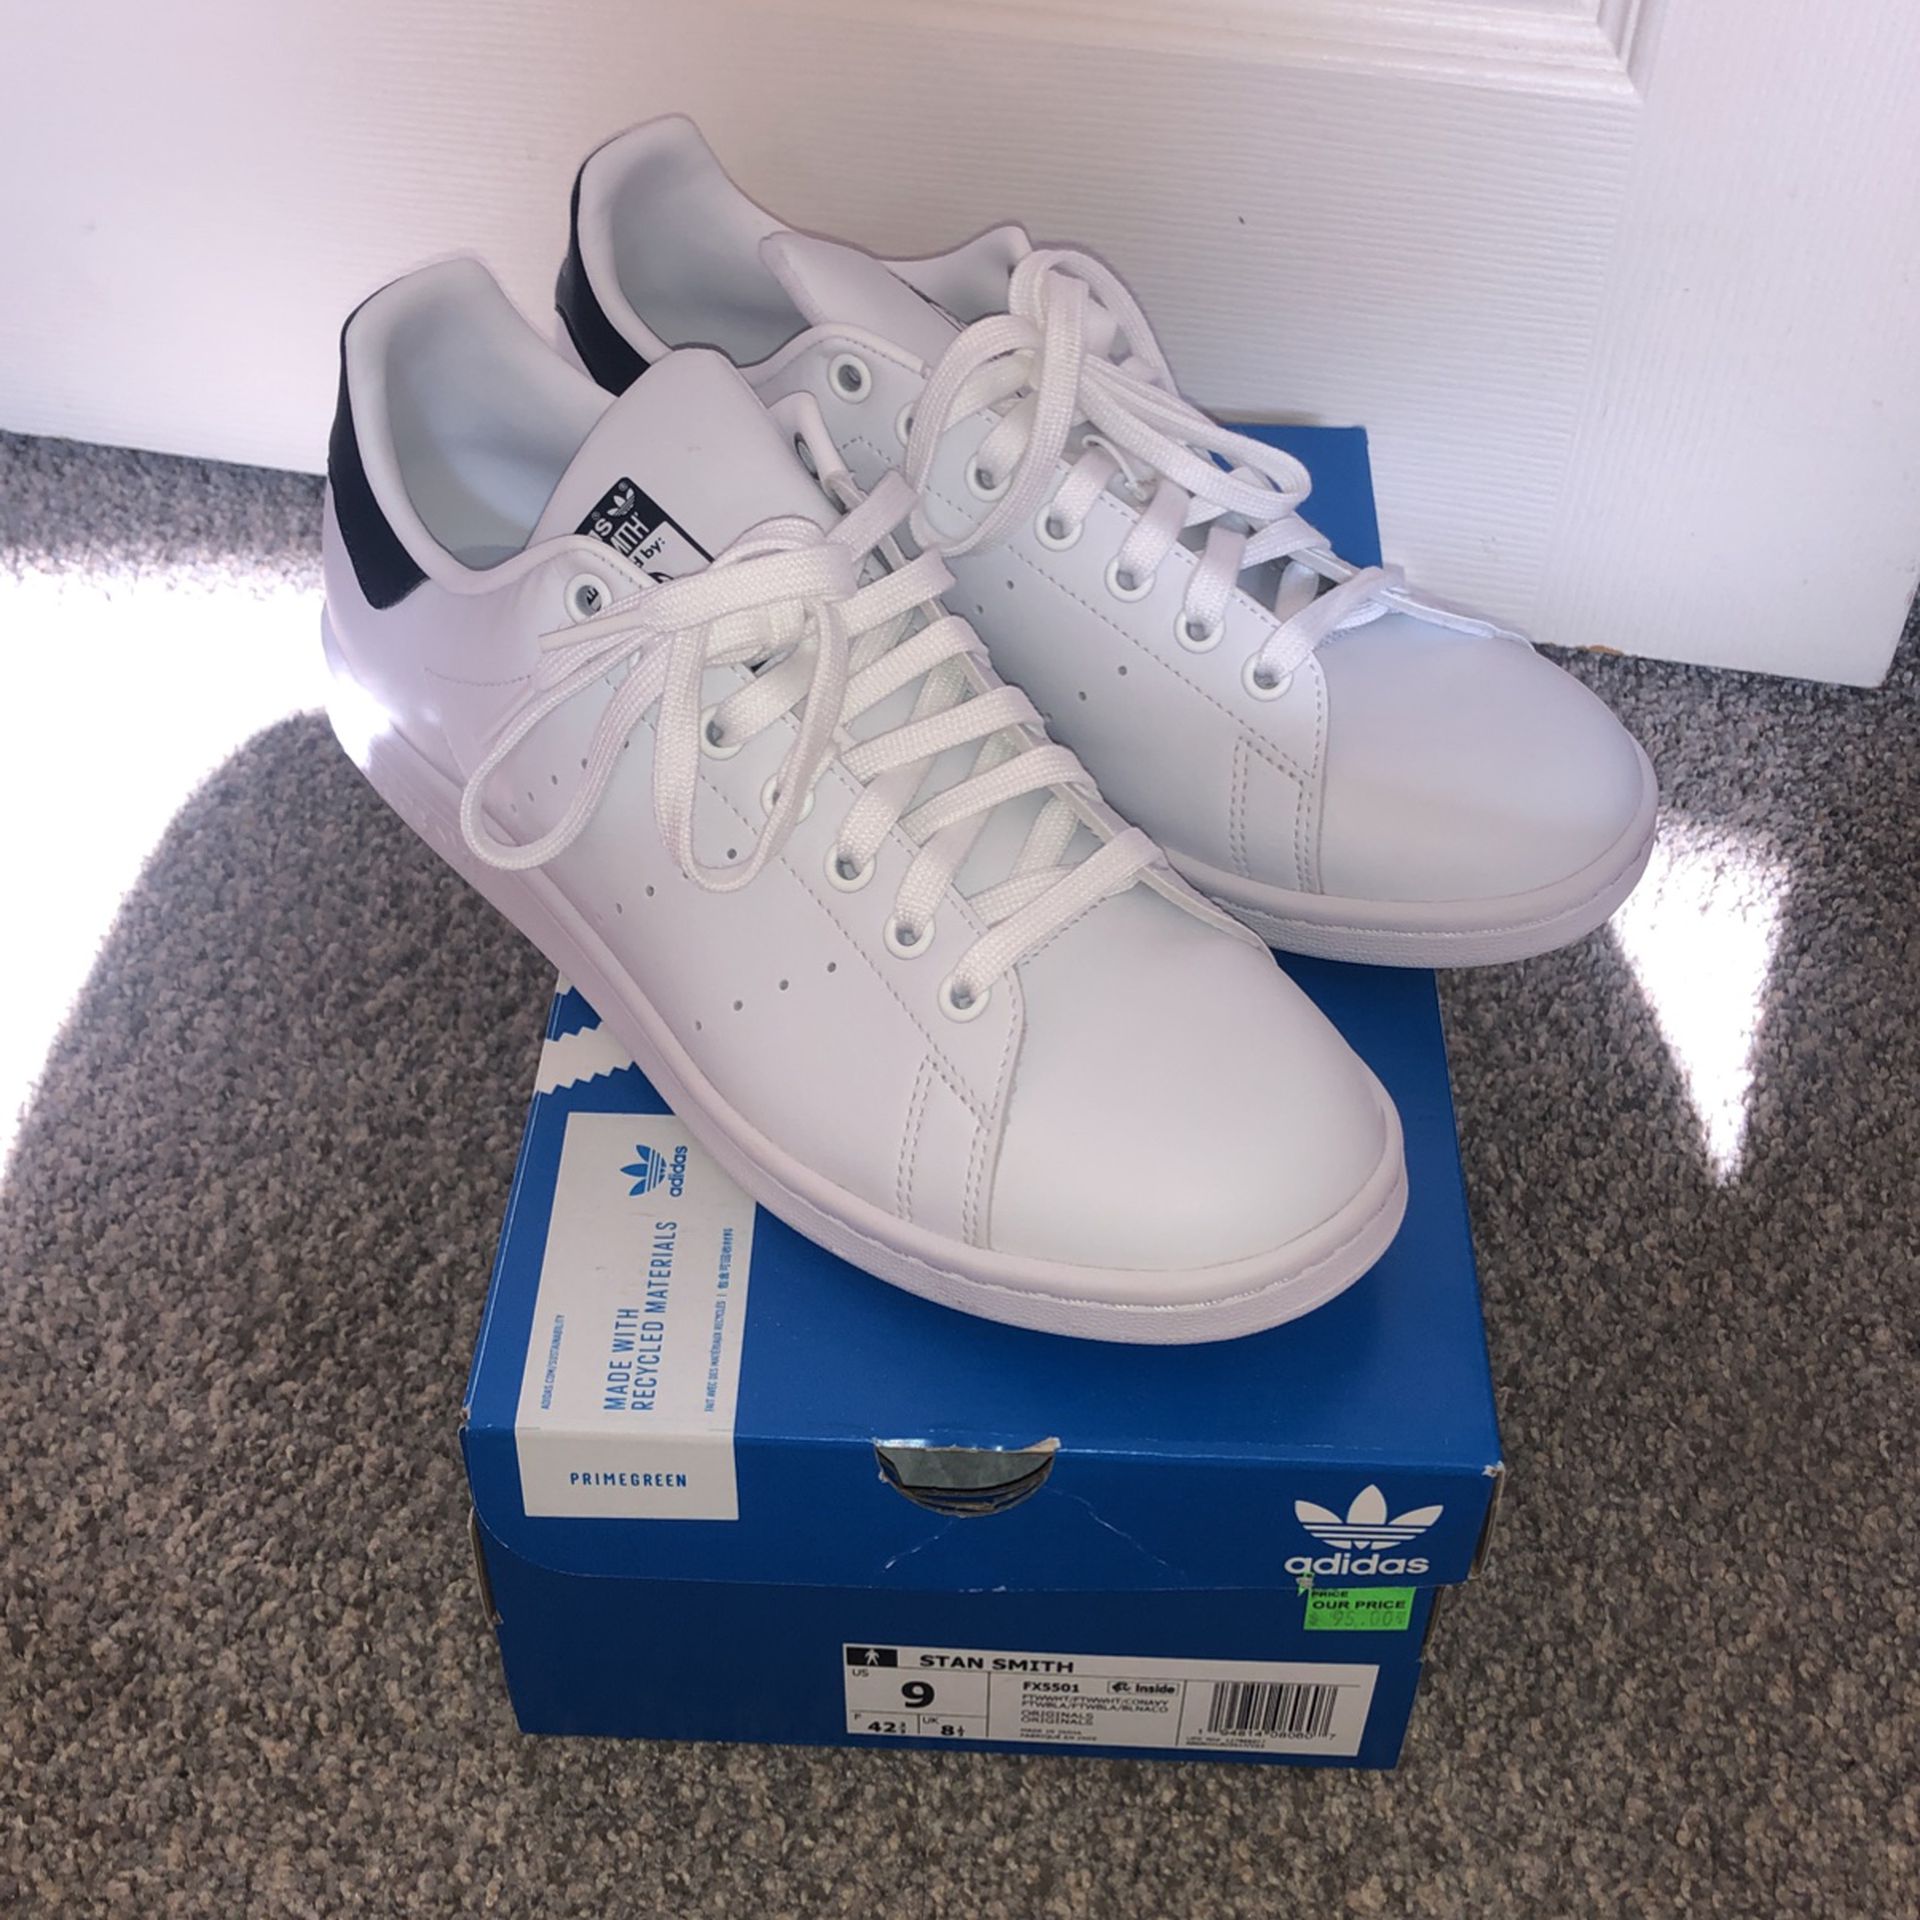 Adidas Smith size 9 Sale in Las Vegas, NV - OfferUp